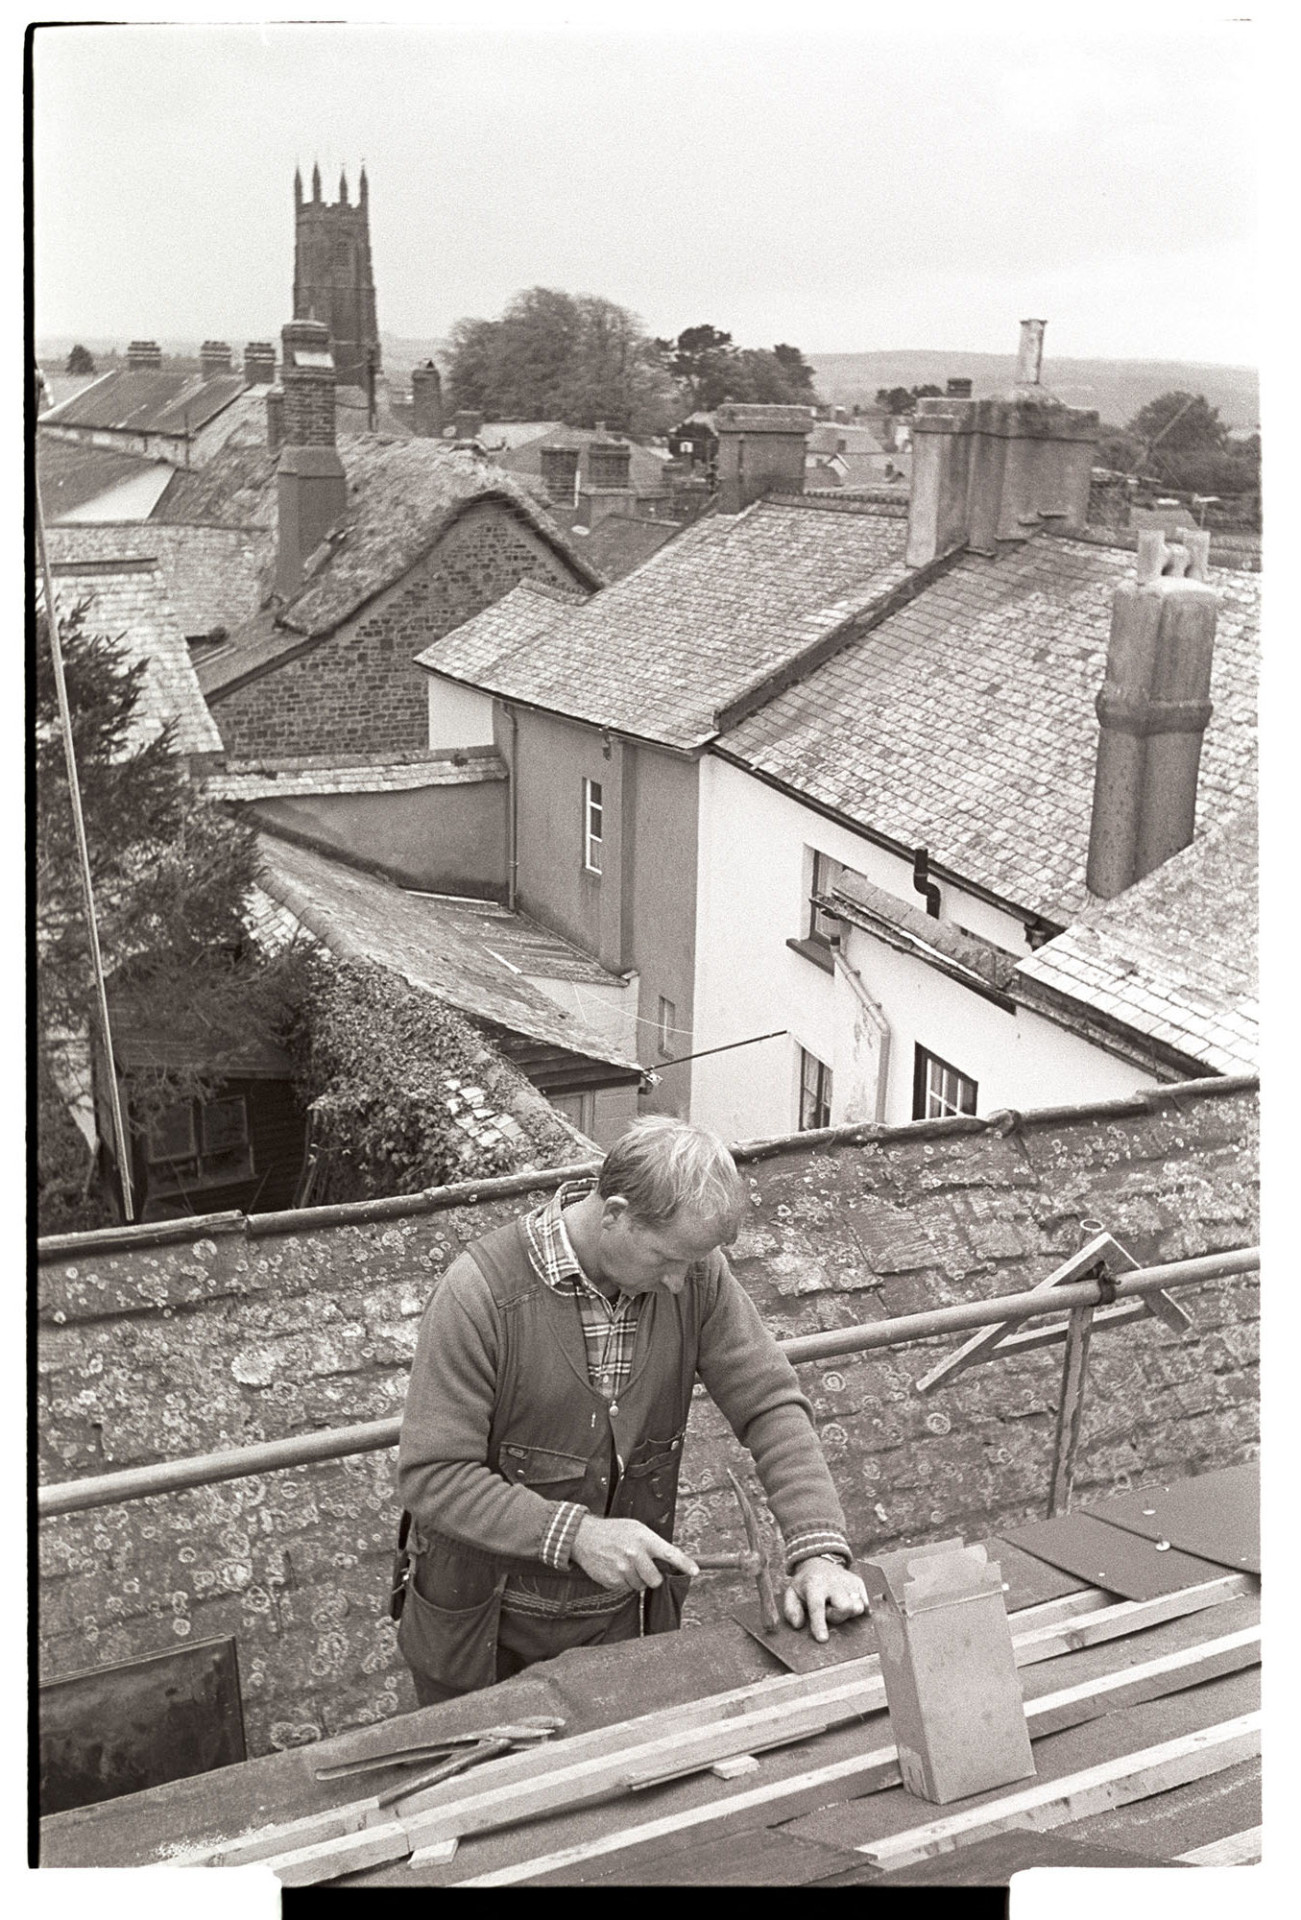 Man hanging slates with view over village with church tower. 
[Mike Hiscock hanging slates on a roof in Chulmleigh. He is stood on scaffolding and using a hammer. Roofs of other houses, both slate and thatch, and the Chulmleigh Church tower are visible in the background.]